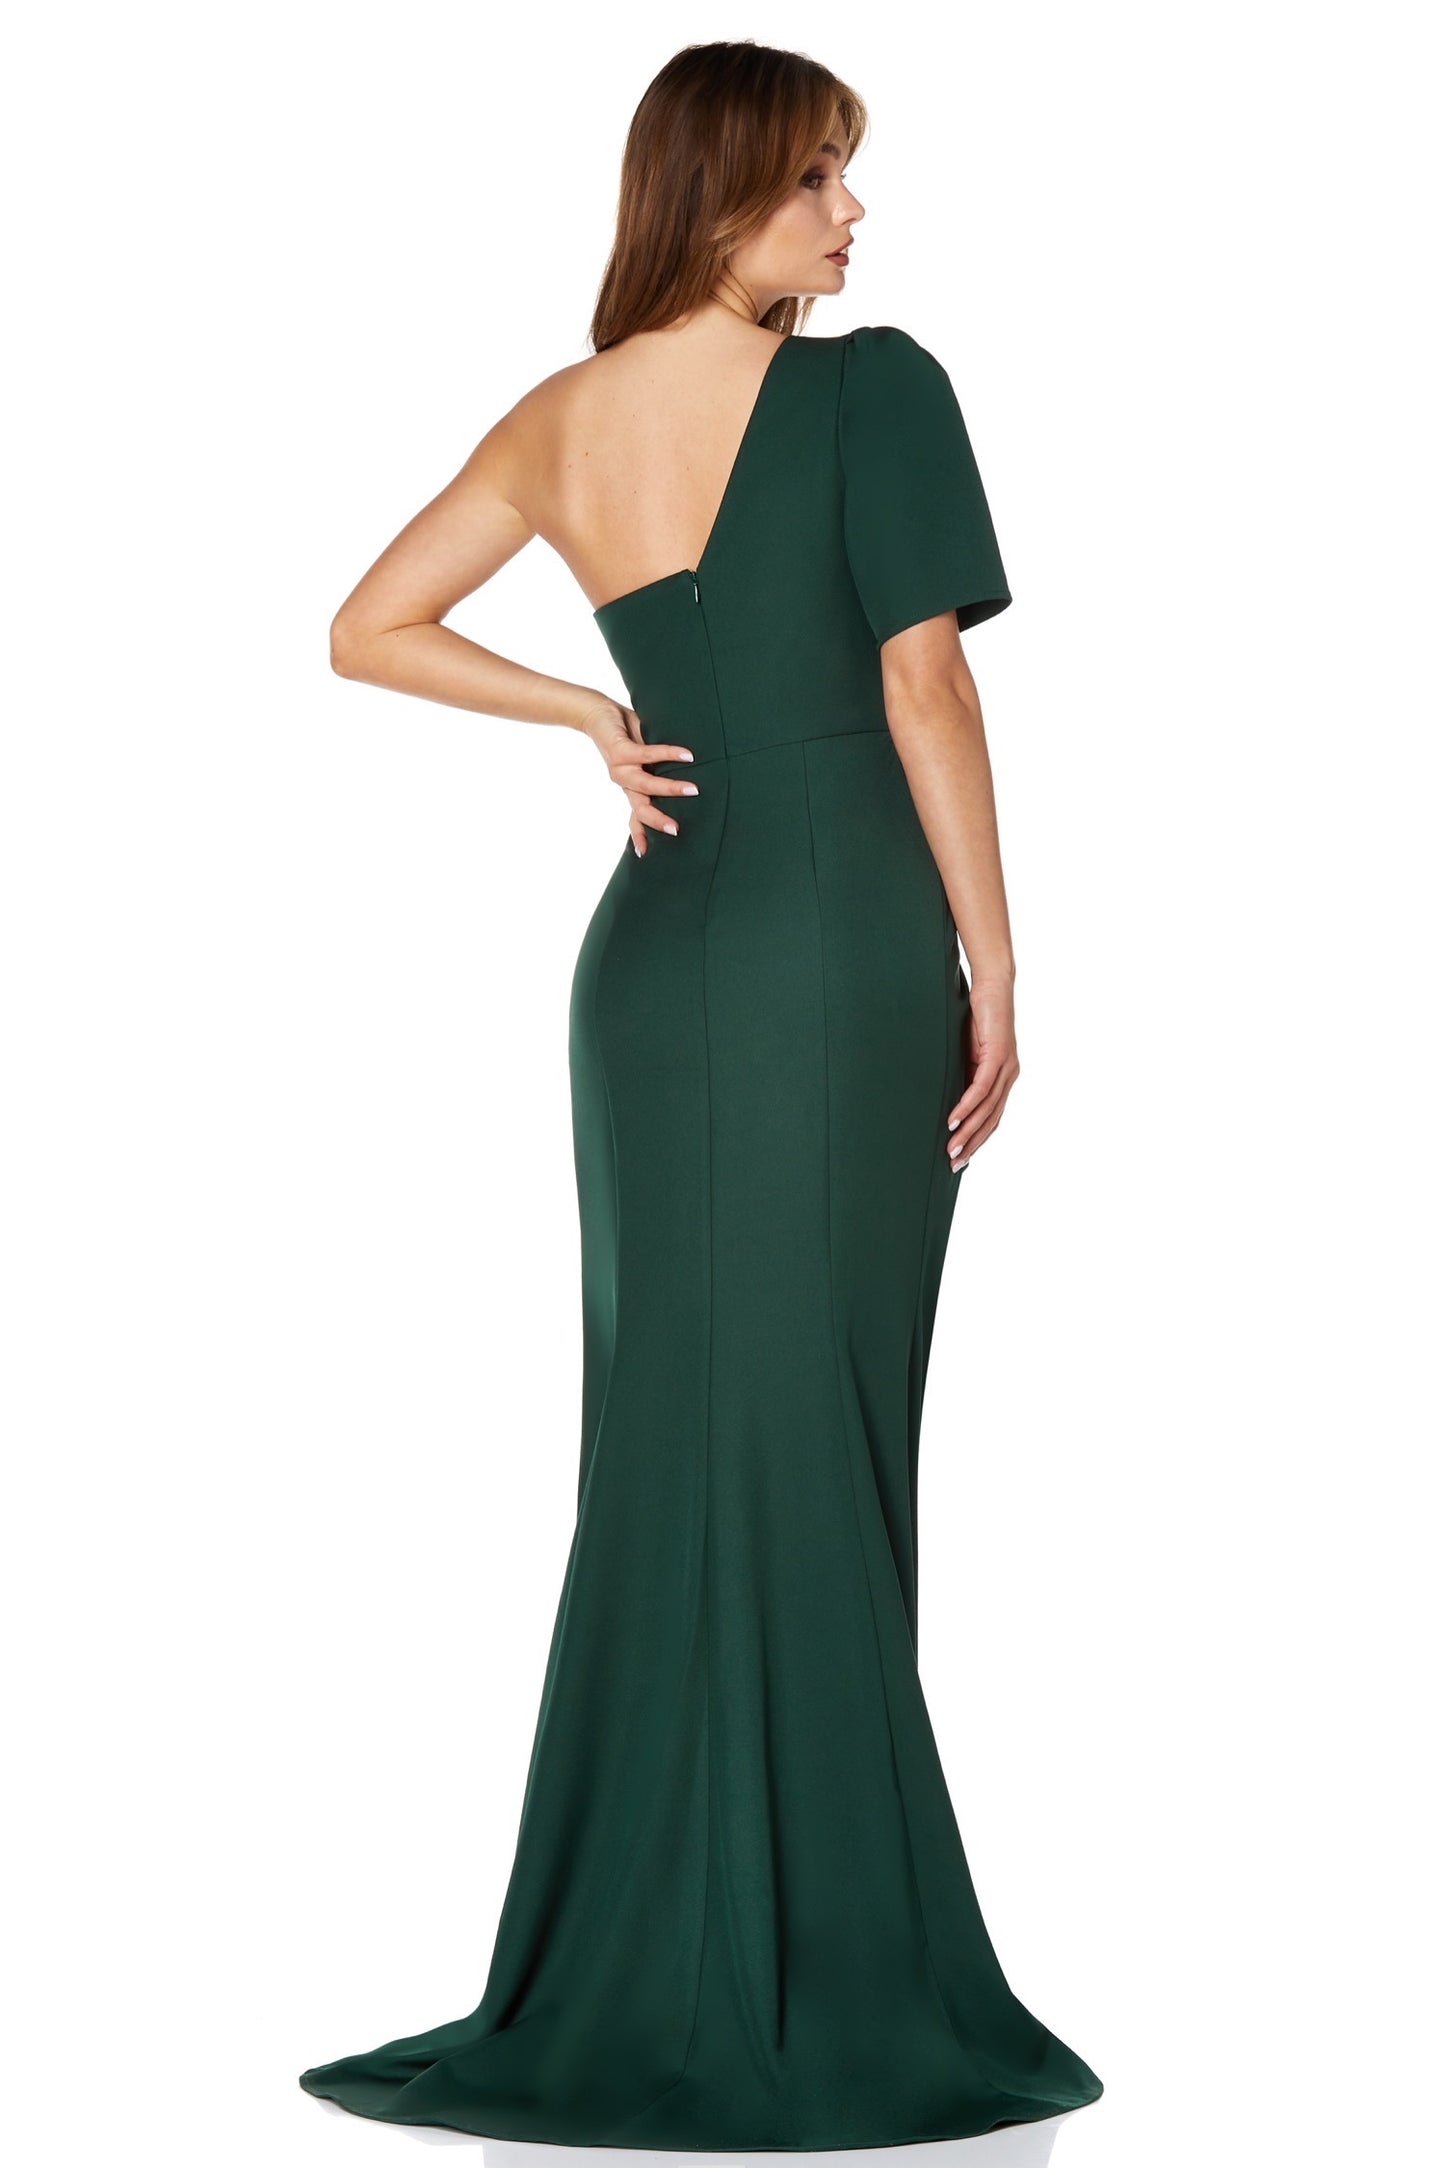 Gianna One Shoulder Sleeve Maxi Dress with Thigh Split